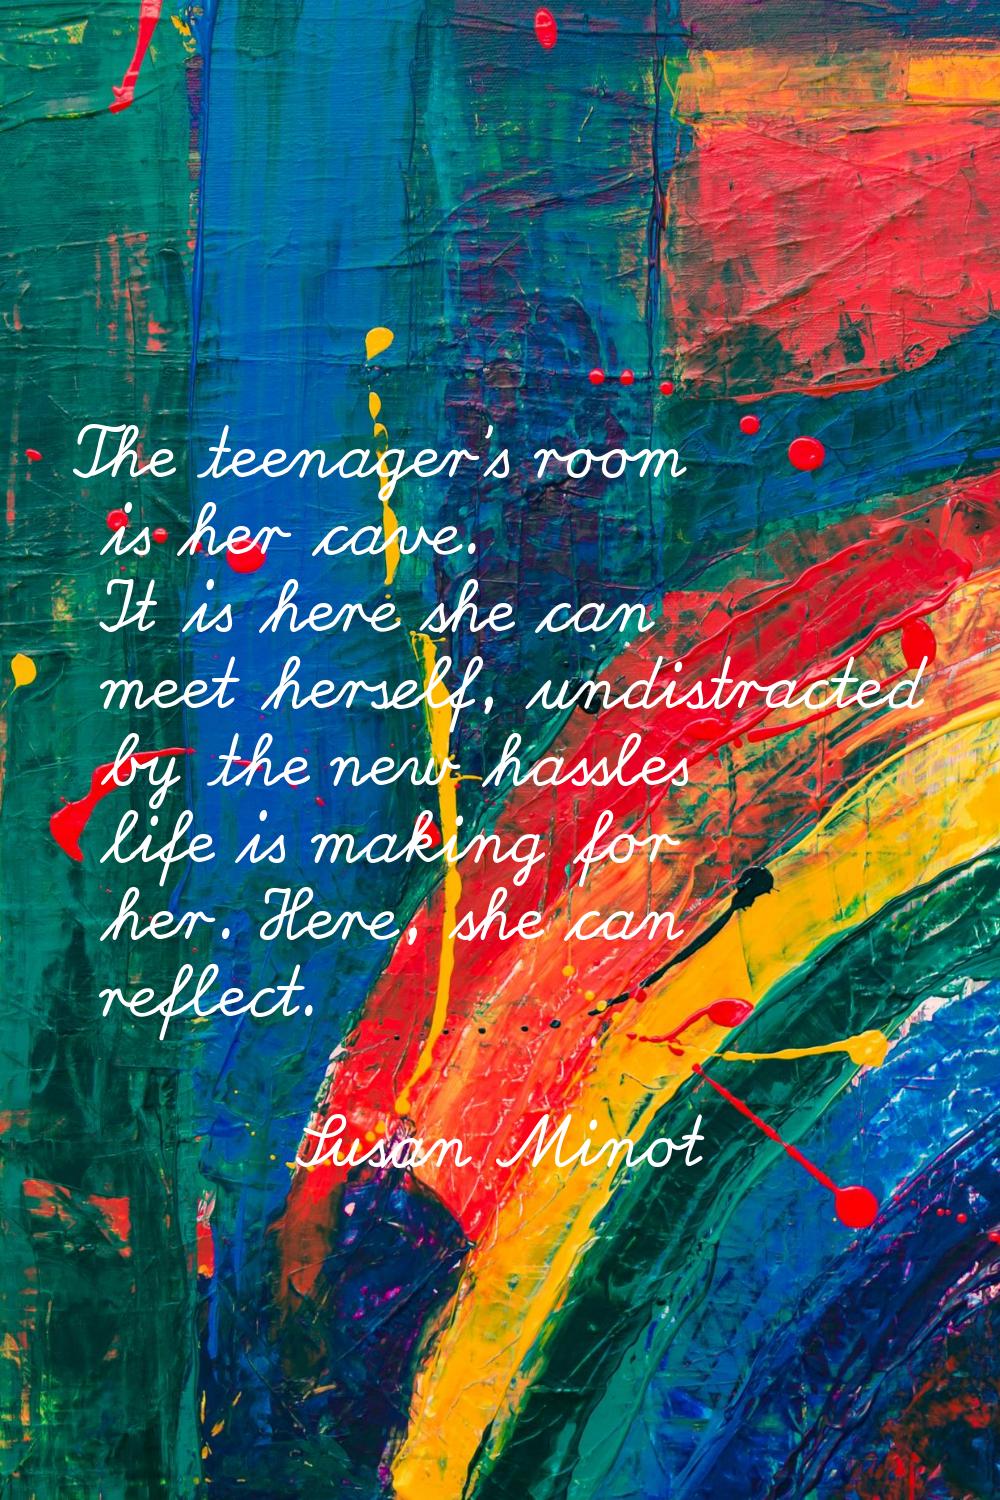 The teenager's room is her cave. It is here she can meet herself, undistracted by the new hassles l